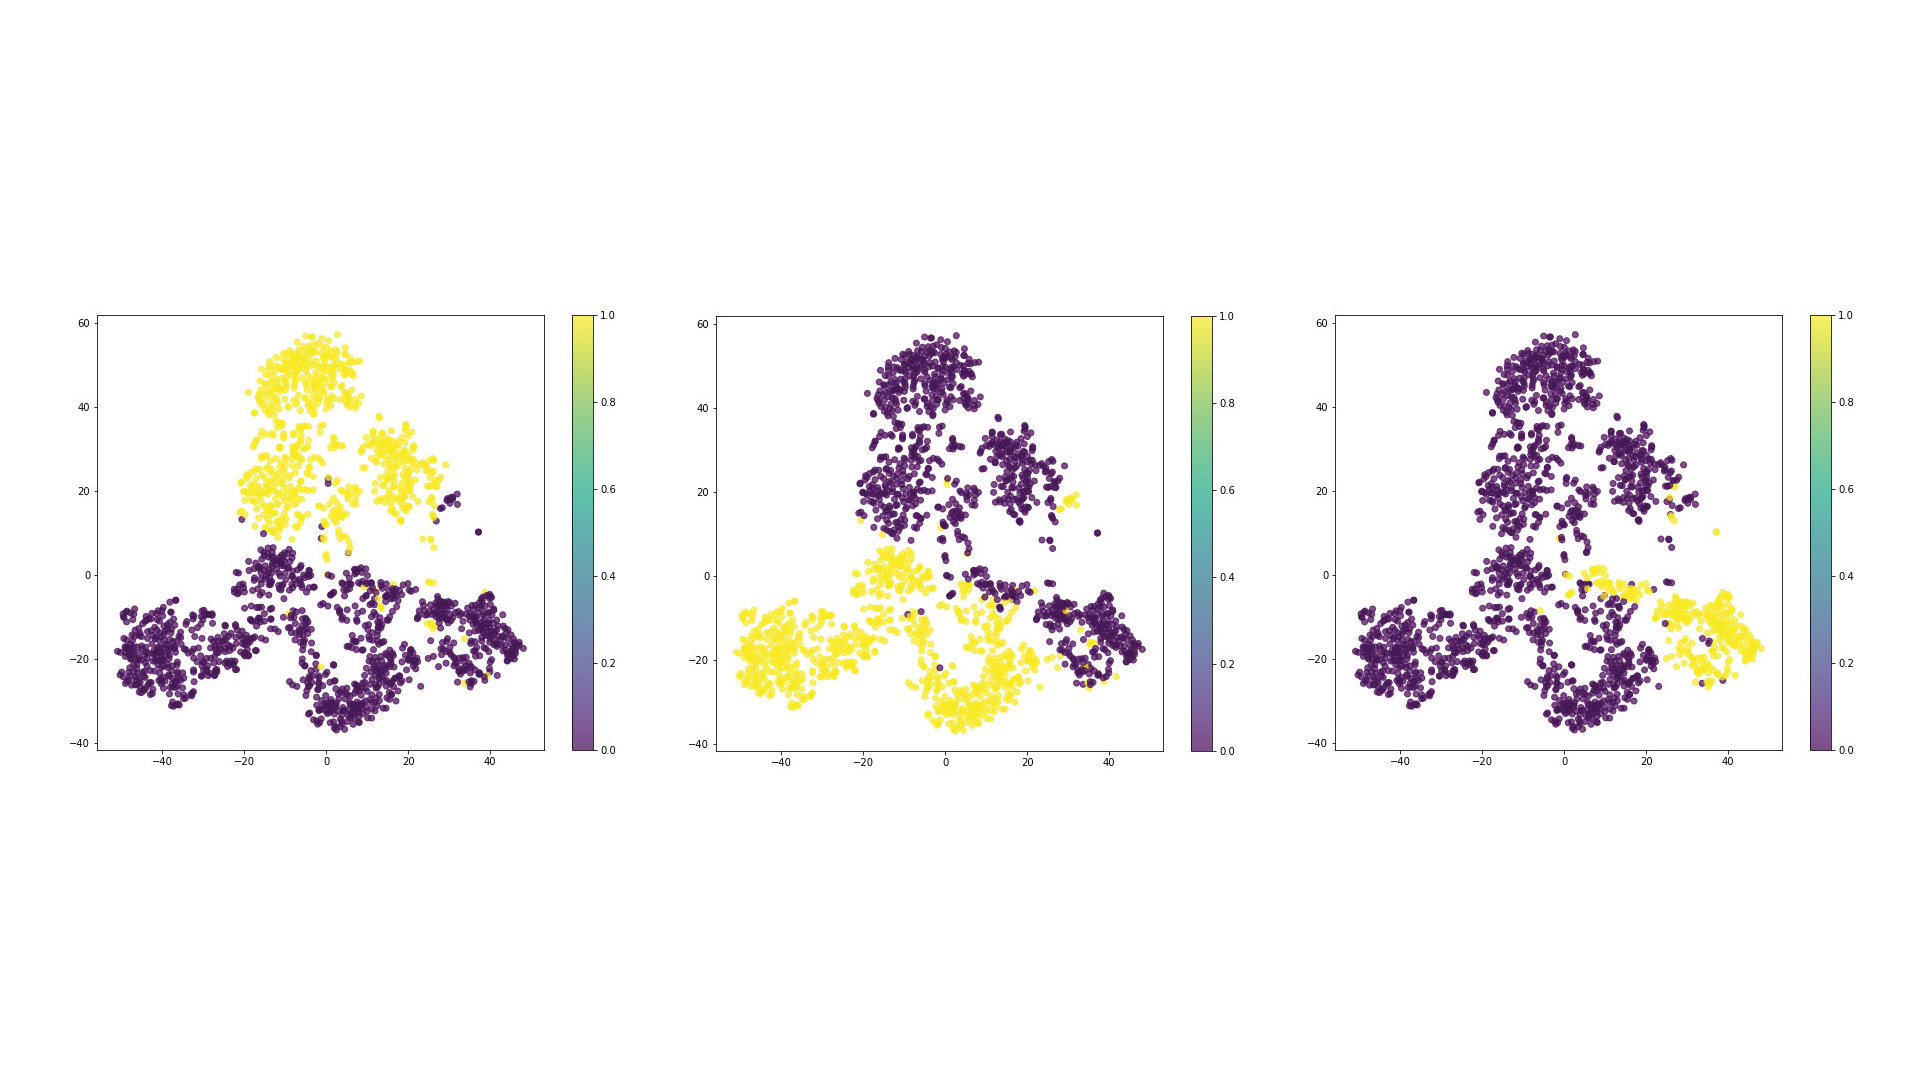 Figure 28: Brain region clustering in the reduced dimensionality space. Each spot represents an individual cell